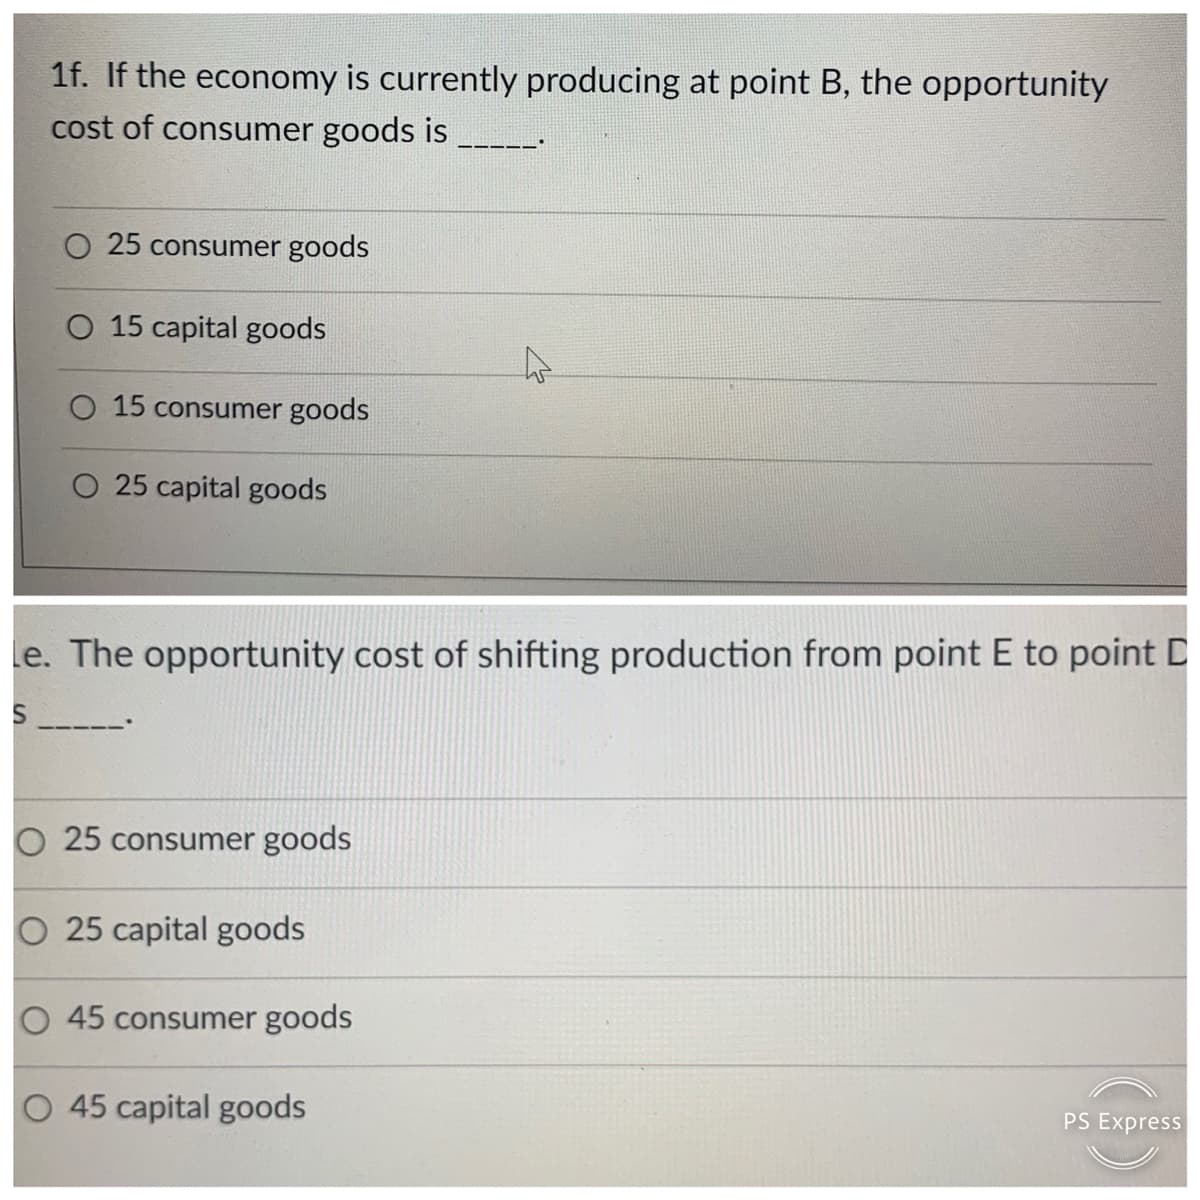 1f. If the economy is currently producing at point B, the opportunity
cost of consumer goods is
O 25 consumer goods
O 15 capital goods
O 15 consumer goods
O 25 capital goods
le. The opportunity cost of shifting production from point E to point D
O 25 consumer goods
25 capital goods
O 45 consumer goods
O 45 capital goods
PS Express
